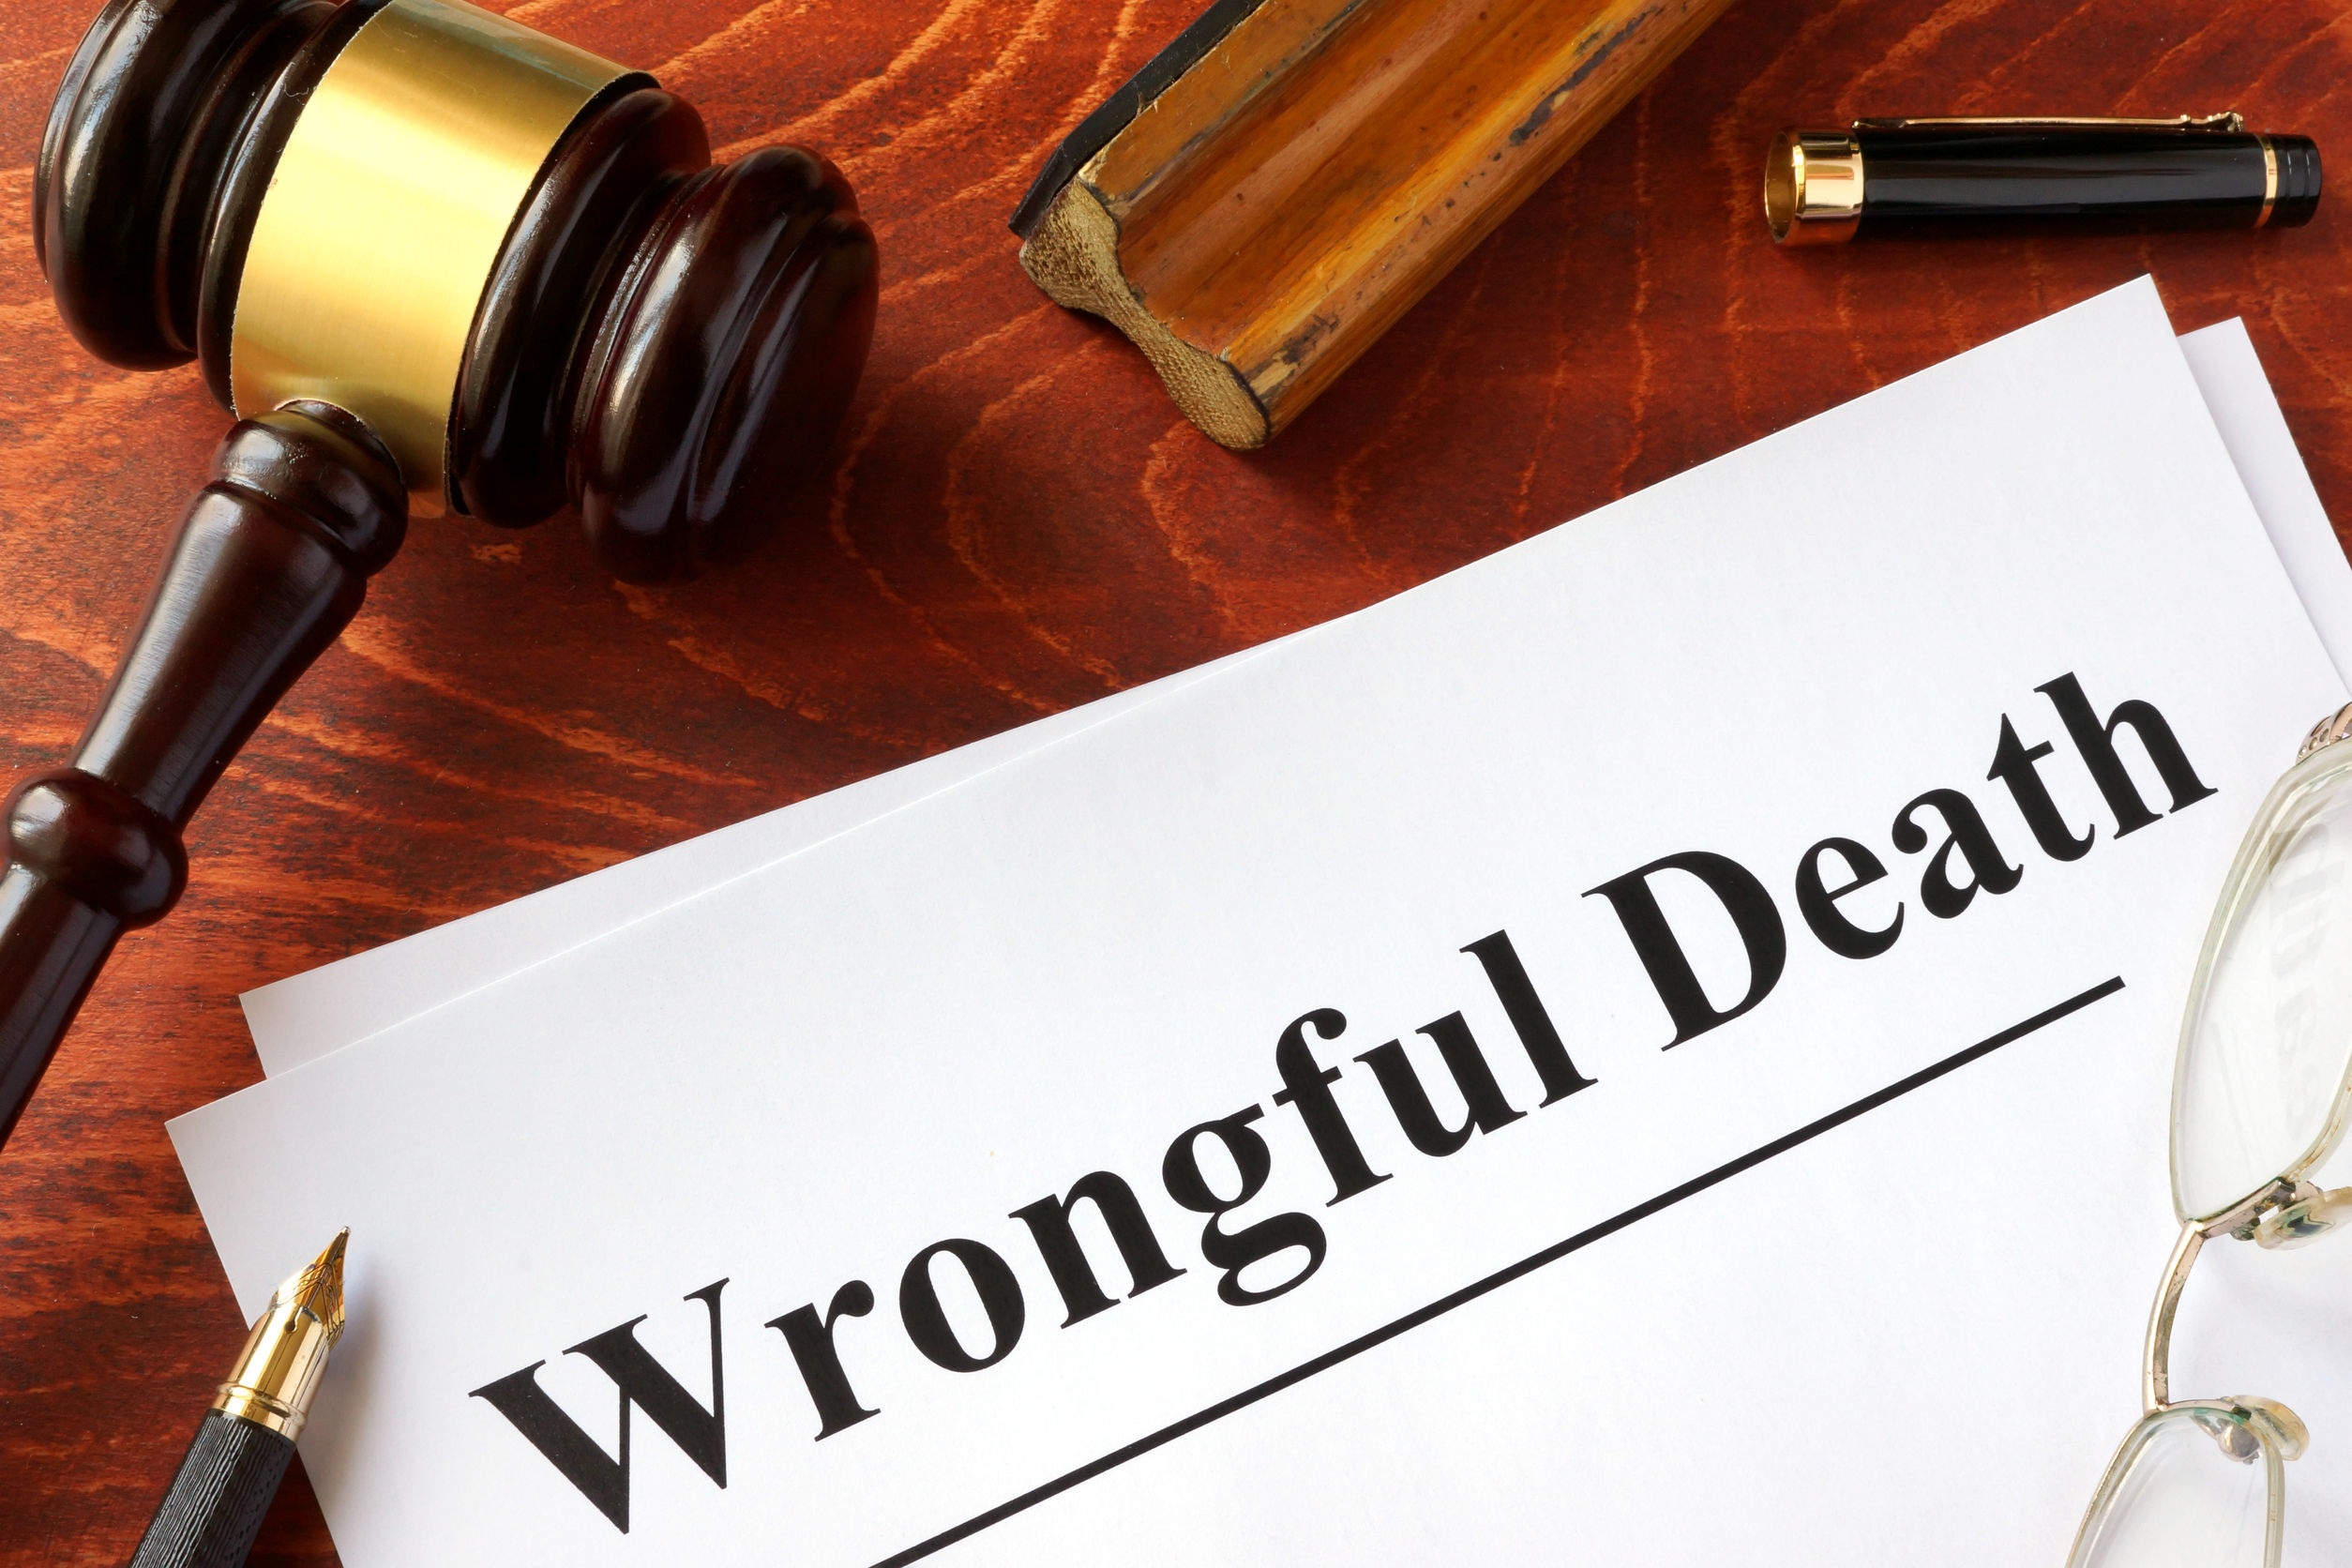 Suing for the wrongful death of your loved one